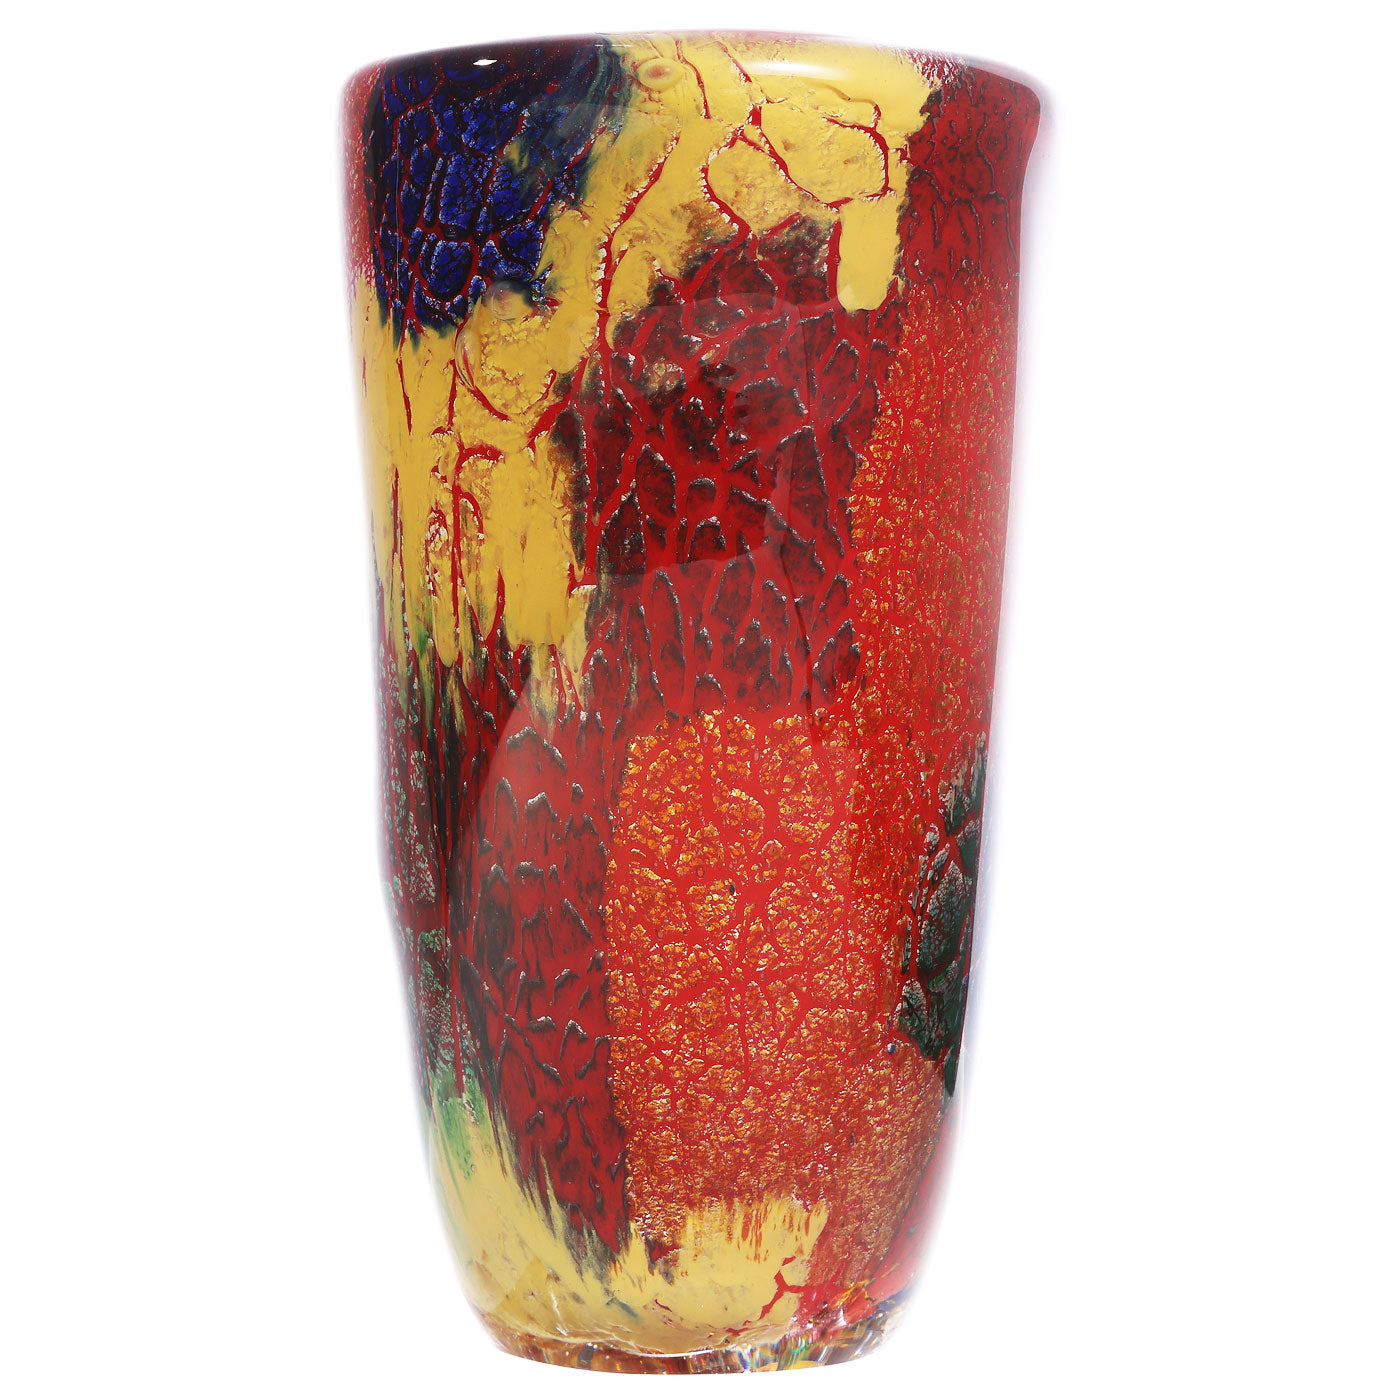 Hand Blown Multicolor Abstract Art Glass Vase 7" tall